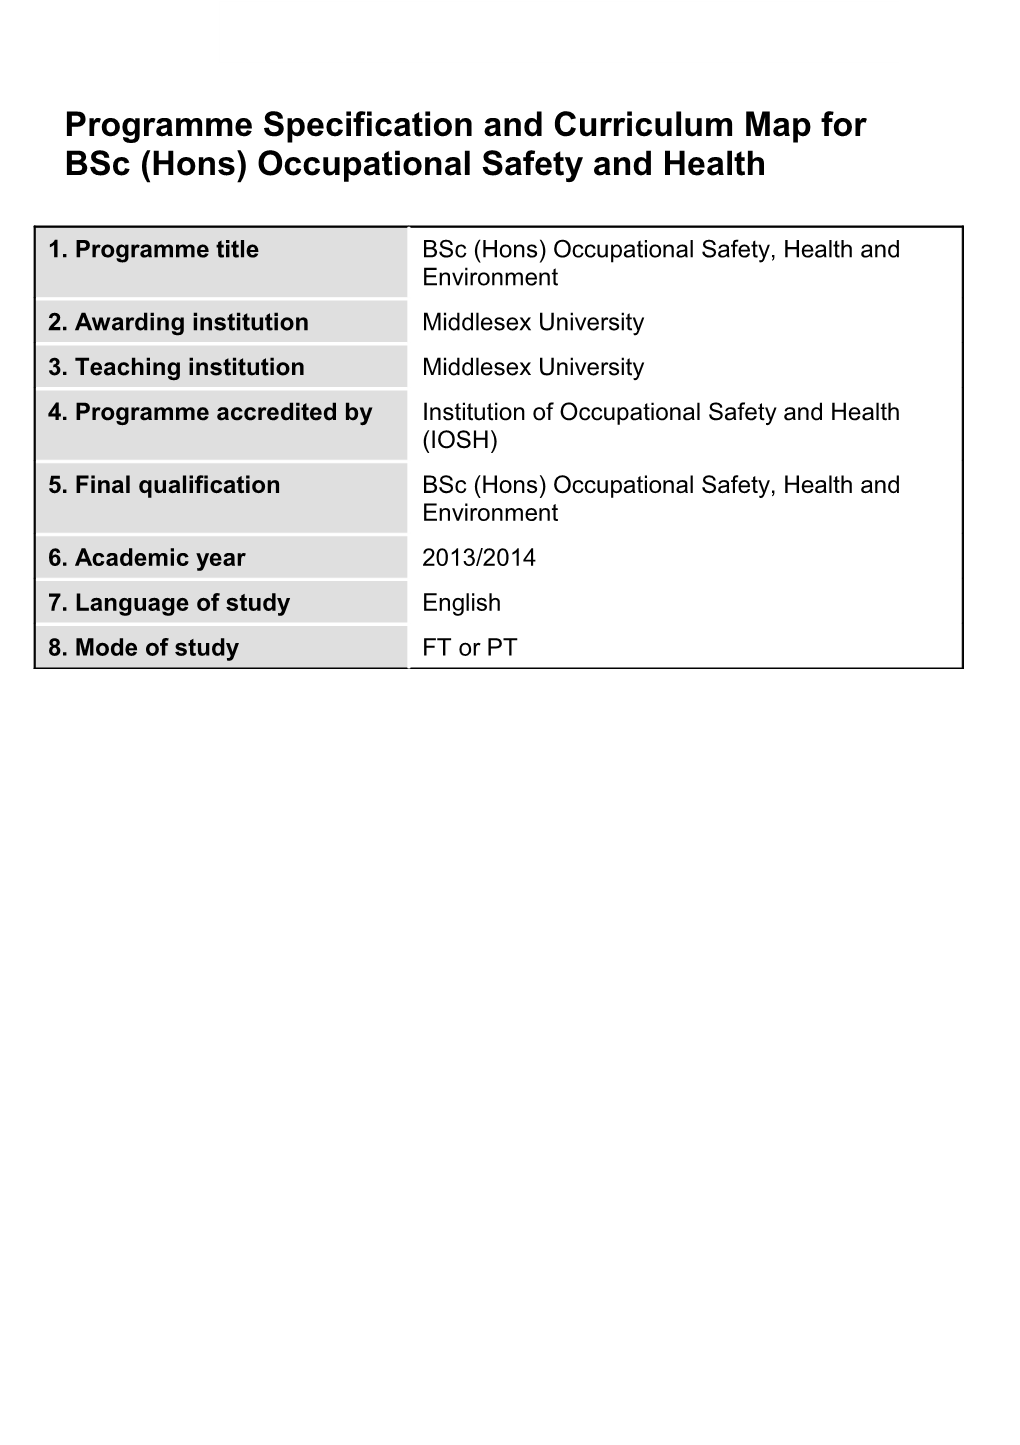 Programme Specification and Curriculum Map for Bsc (Hons) Occupational Safety and Health